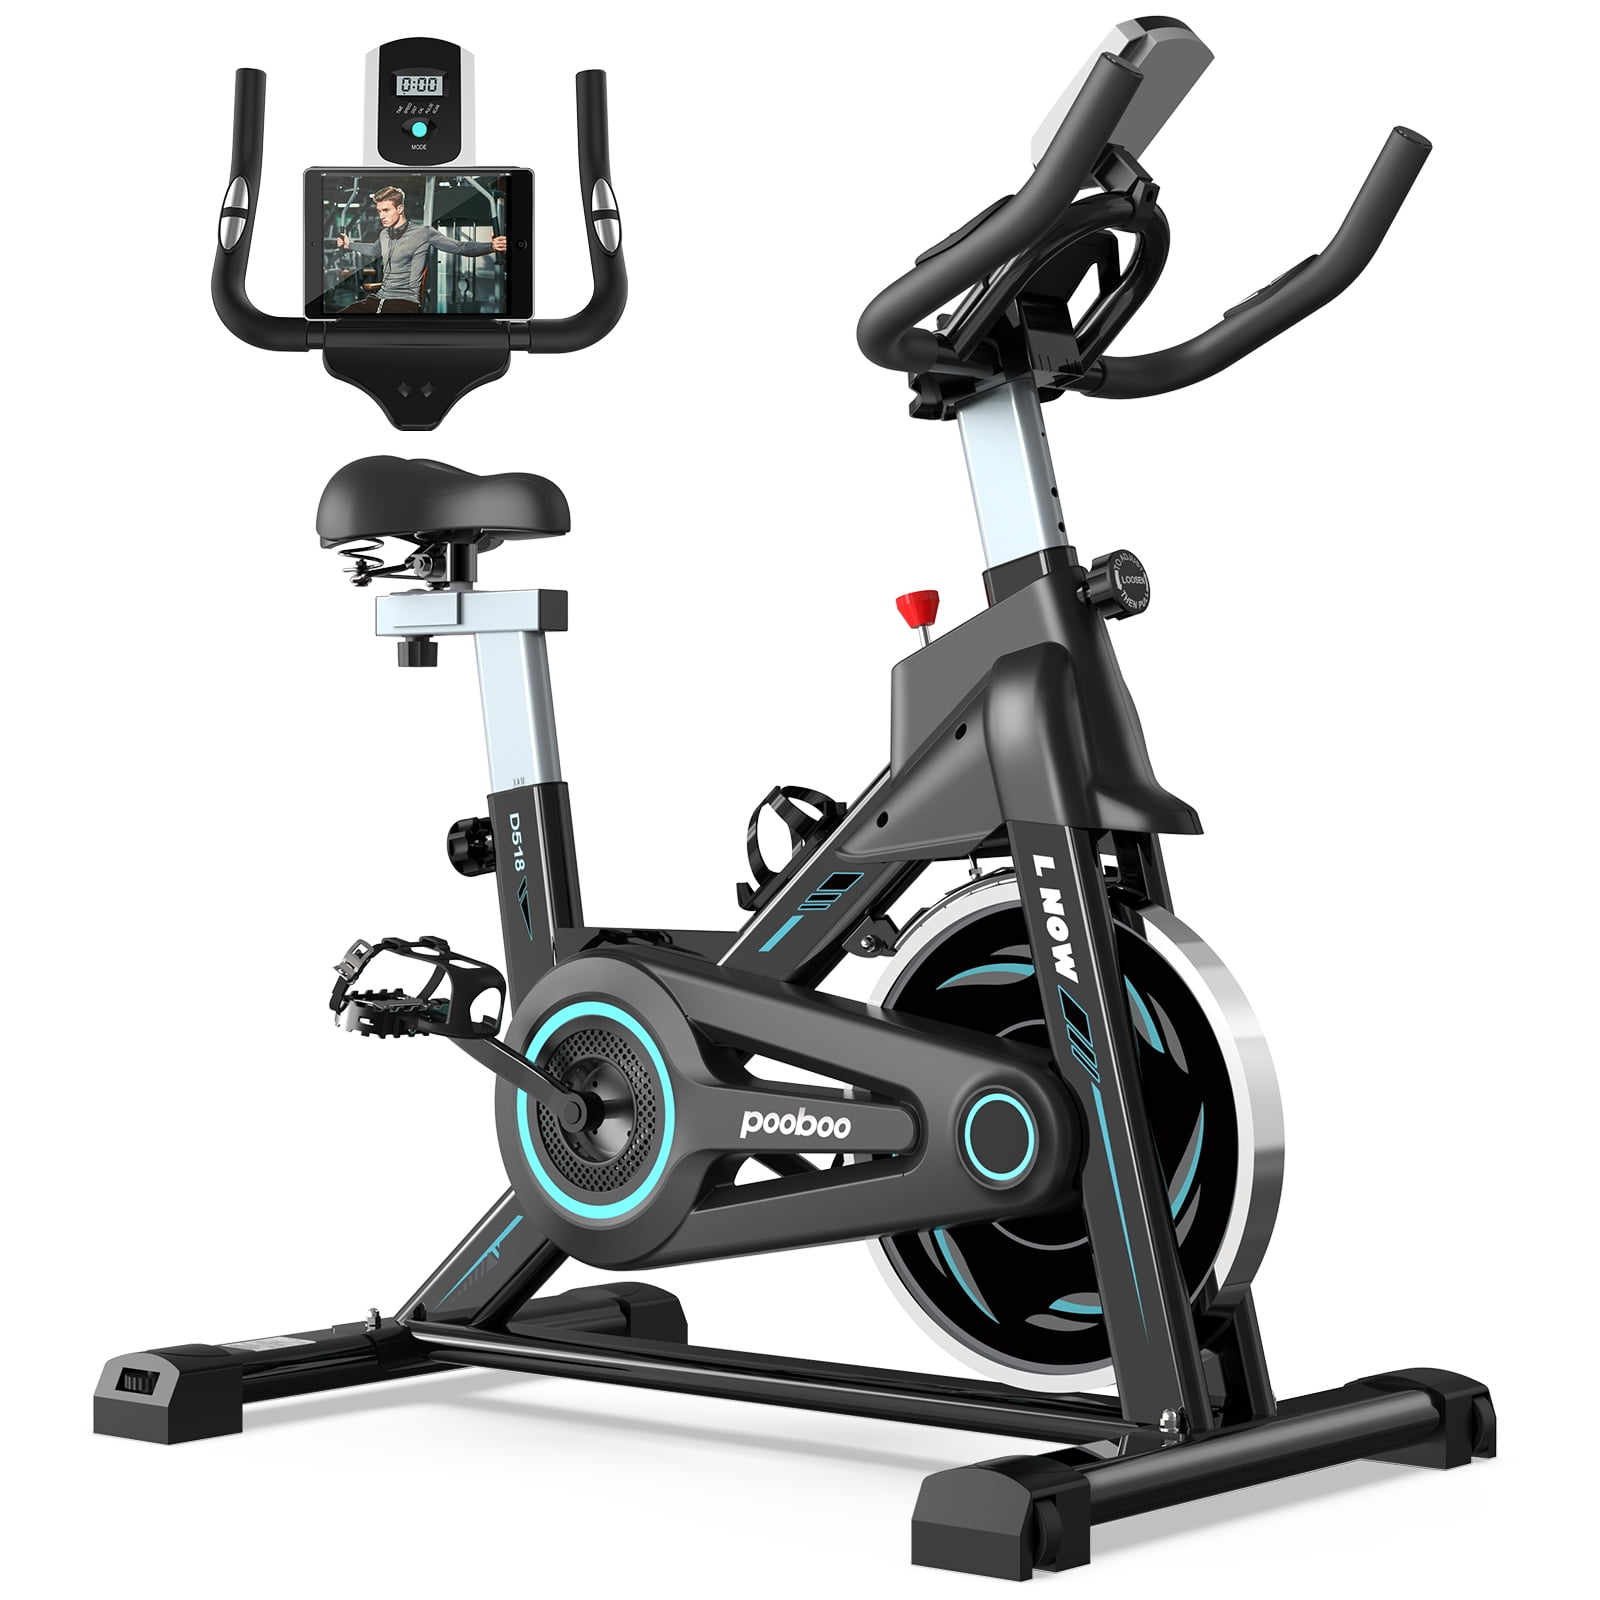 D518 pooboo Indoor Cycling Bike with Magnetic Resistance Exercise Bikes Stationary,Silent Belt Drive with LCD Monitor & Comfortable Seat Cushion for Home Cardio Workout 